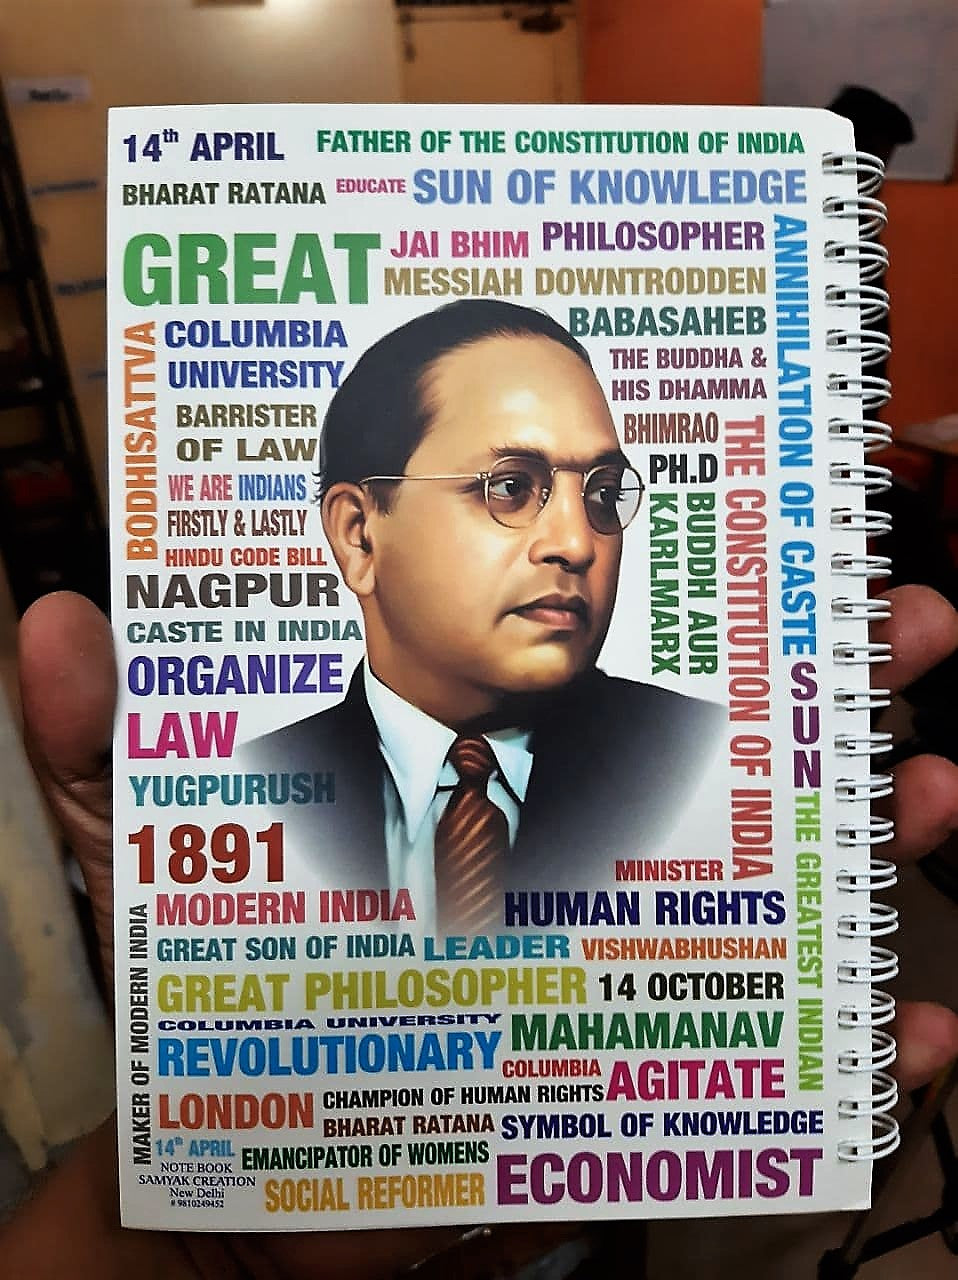 Symbol of Knowledge Note Book